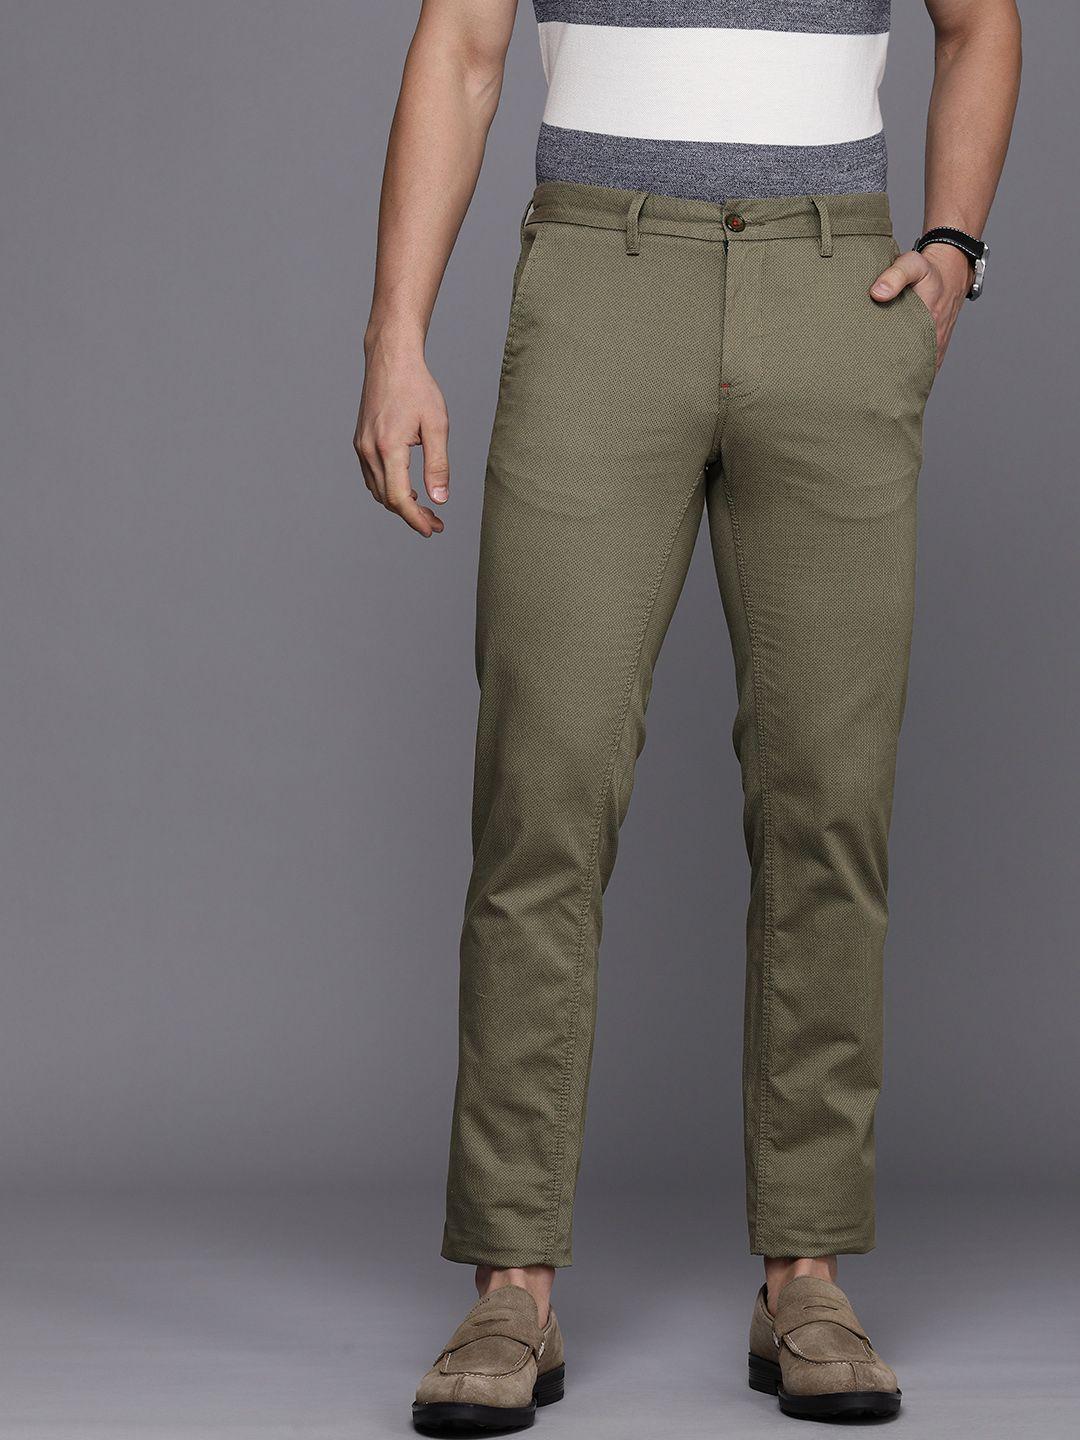 louis philippe sport men olive green printed slim fit trousers